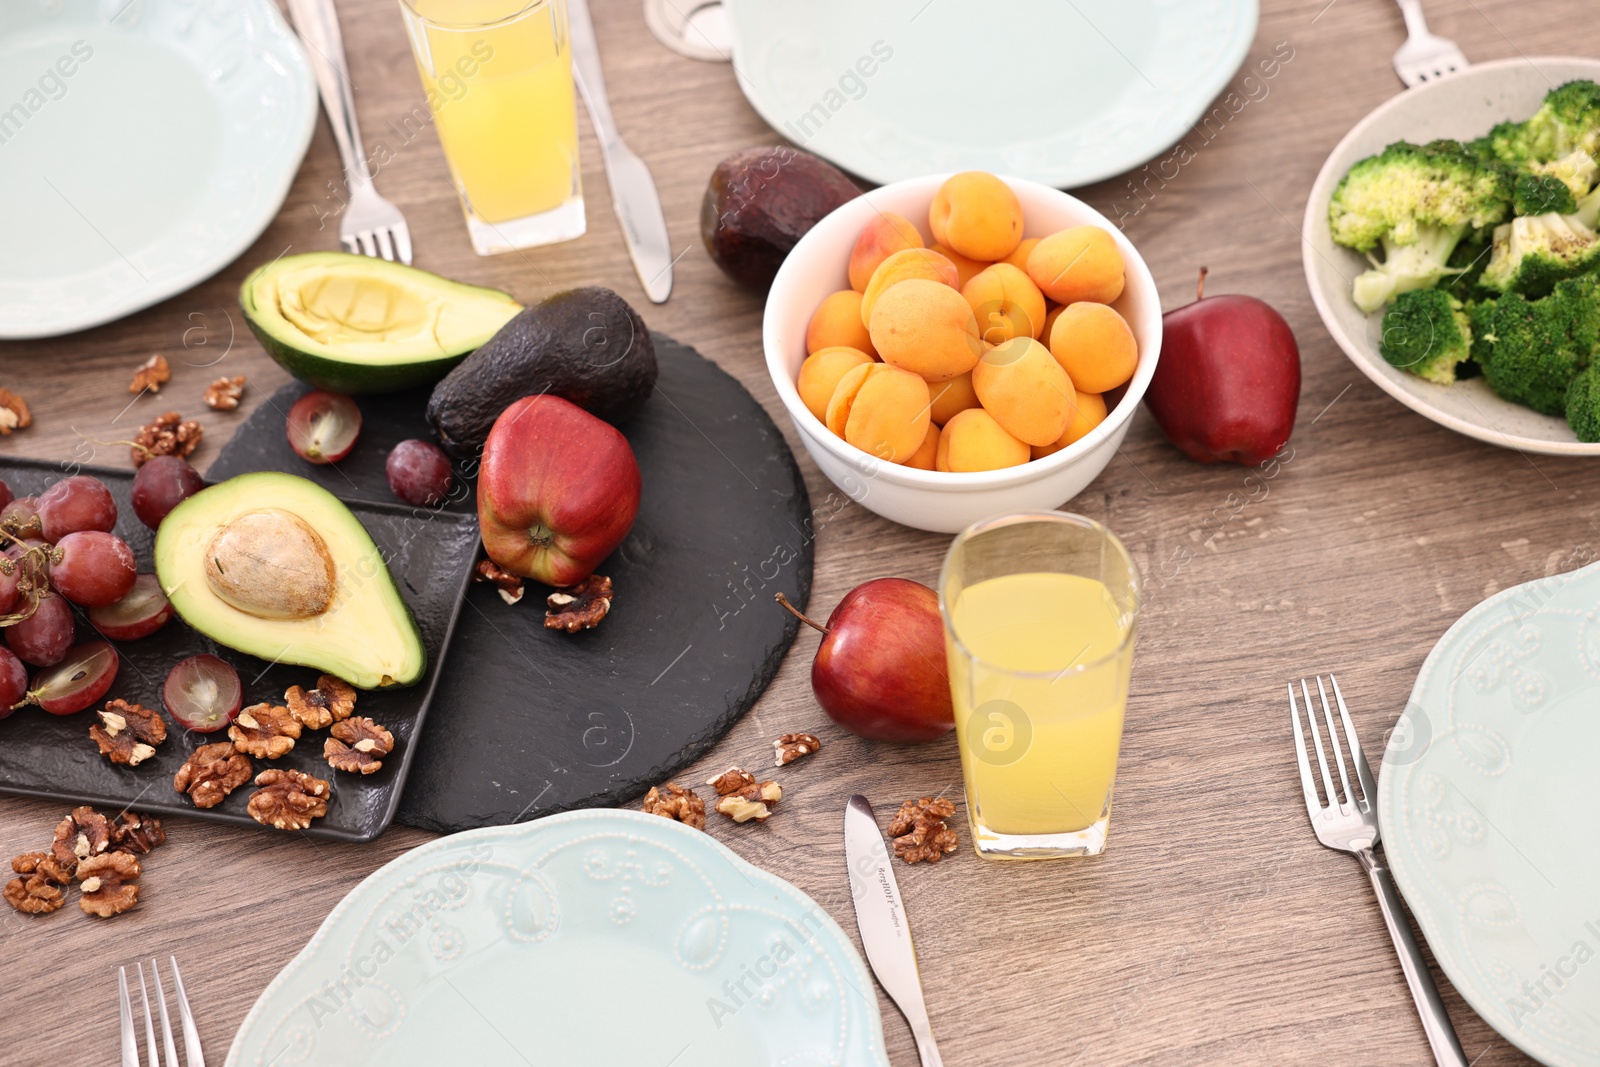 Photo of Healthy vegetarian food, glasses of juice, plates and cutlery on wooden table